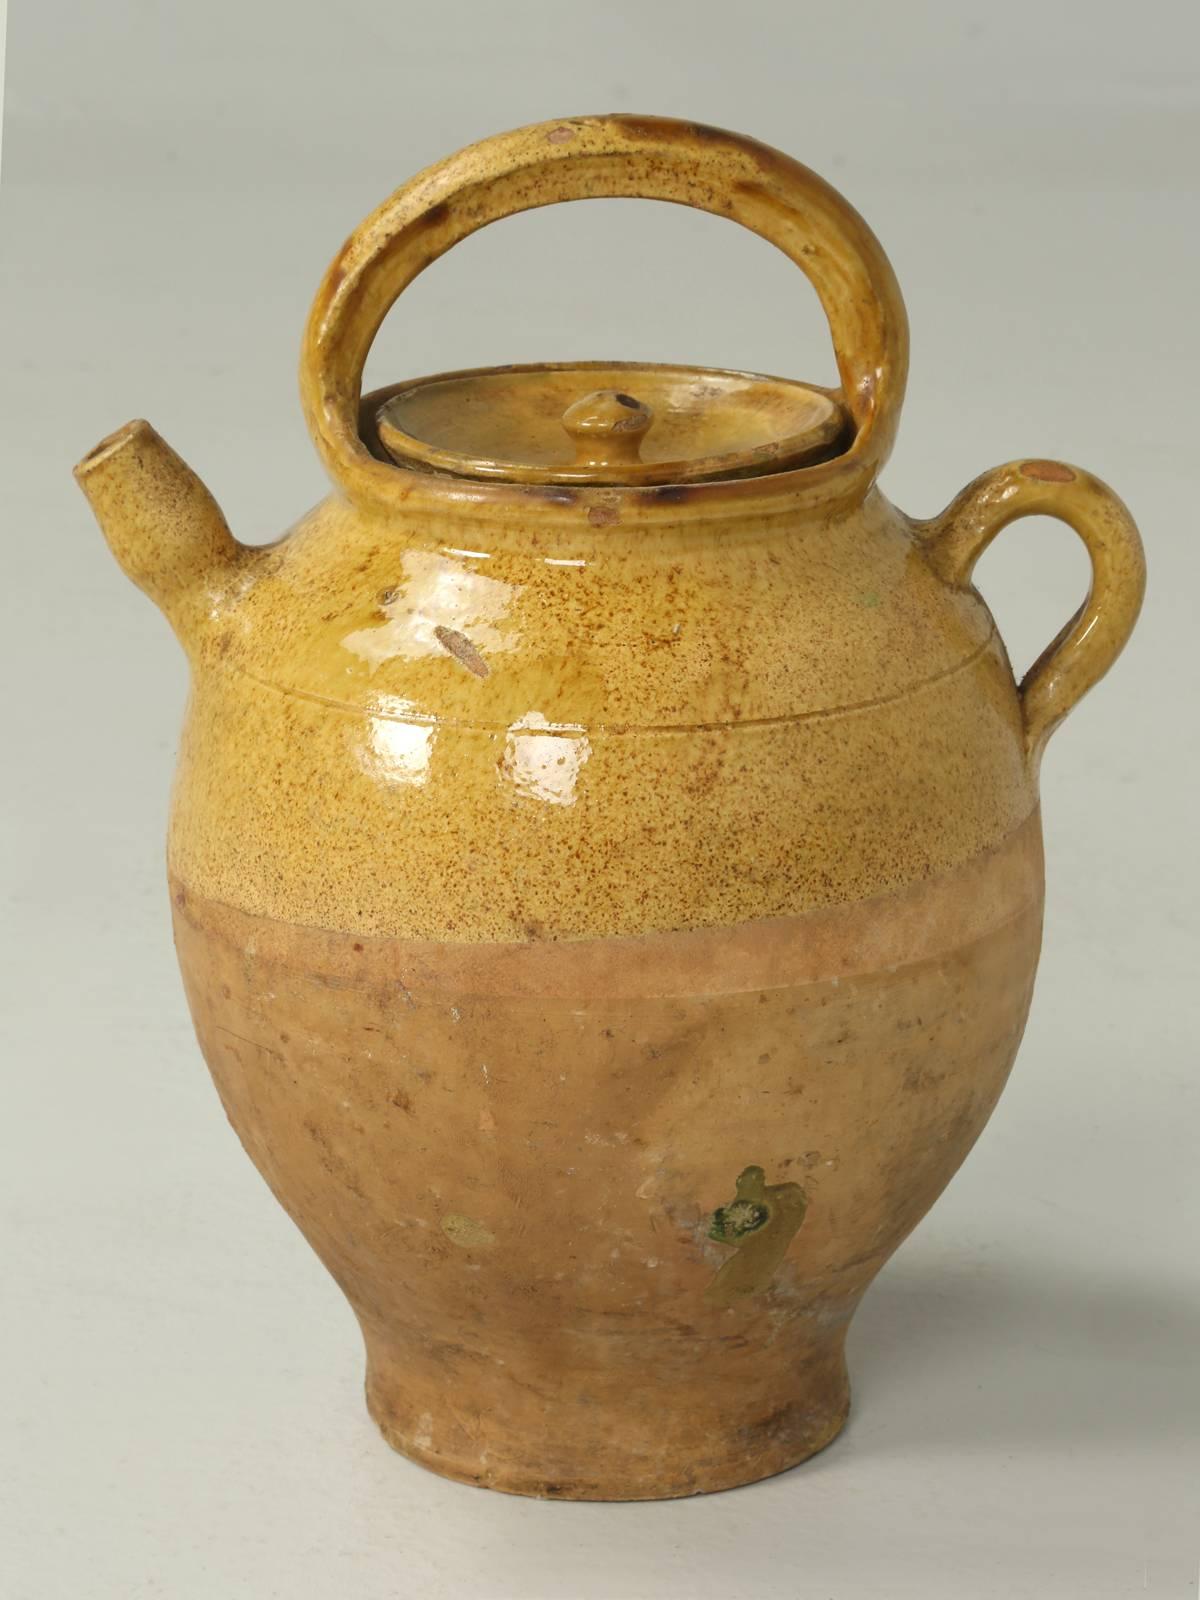 Antique French authentic ceramic water pitcher, or 'cruche', with an unbroken handle and complete with its original lid. The antique French jug or pitcher was made of ochre-glazed terracotta earthenware and was used to transport water and were